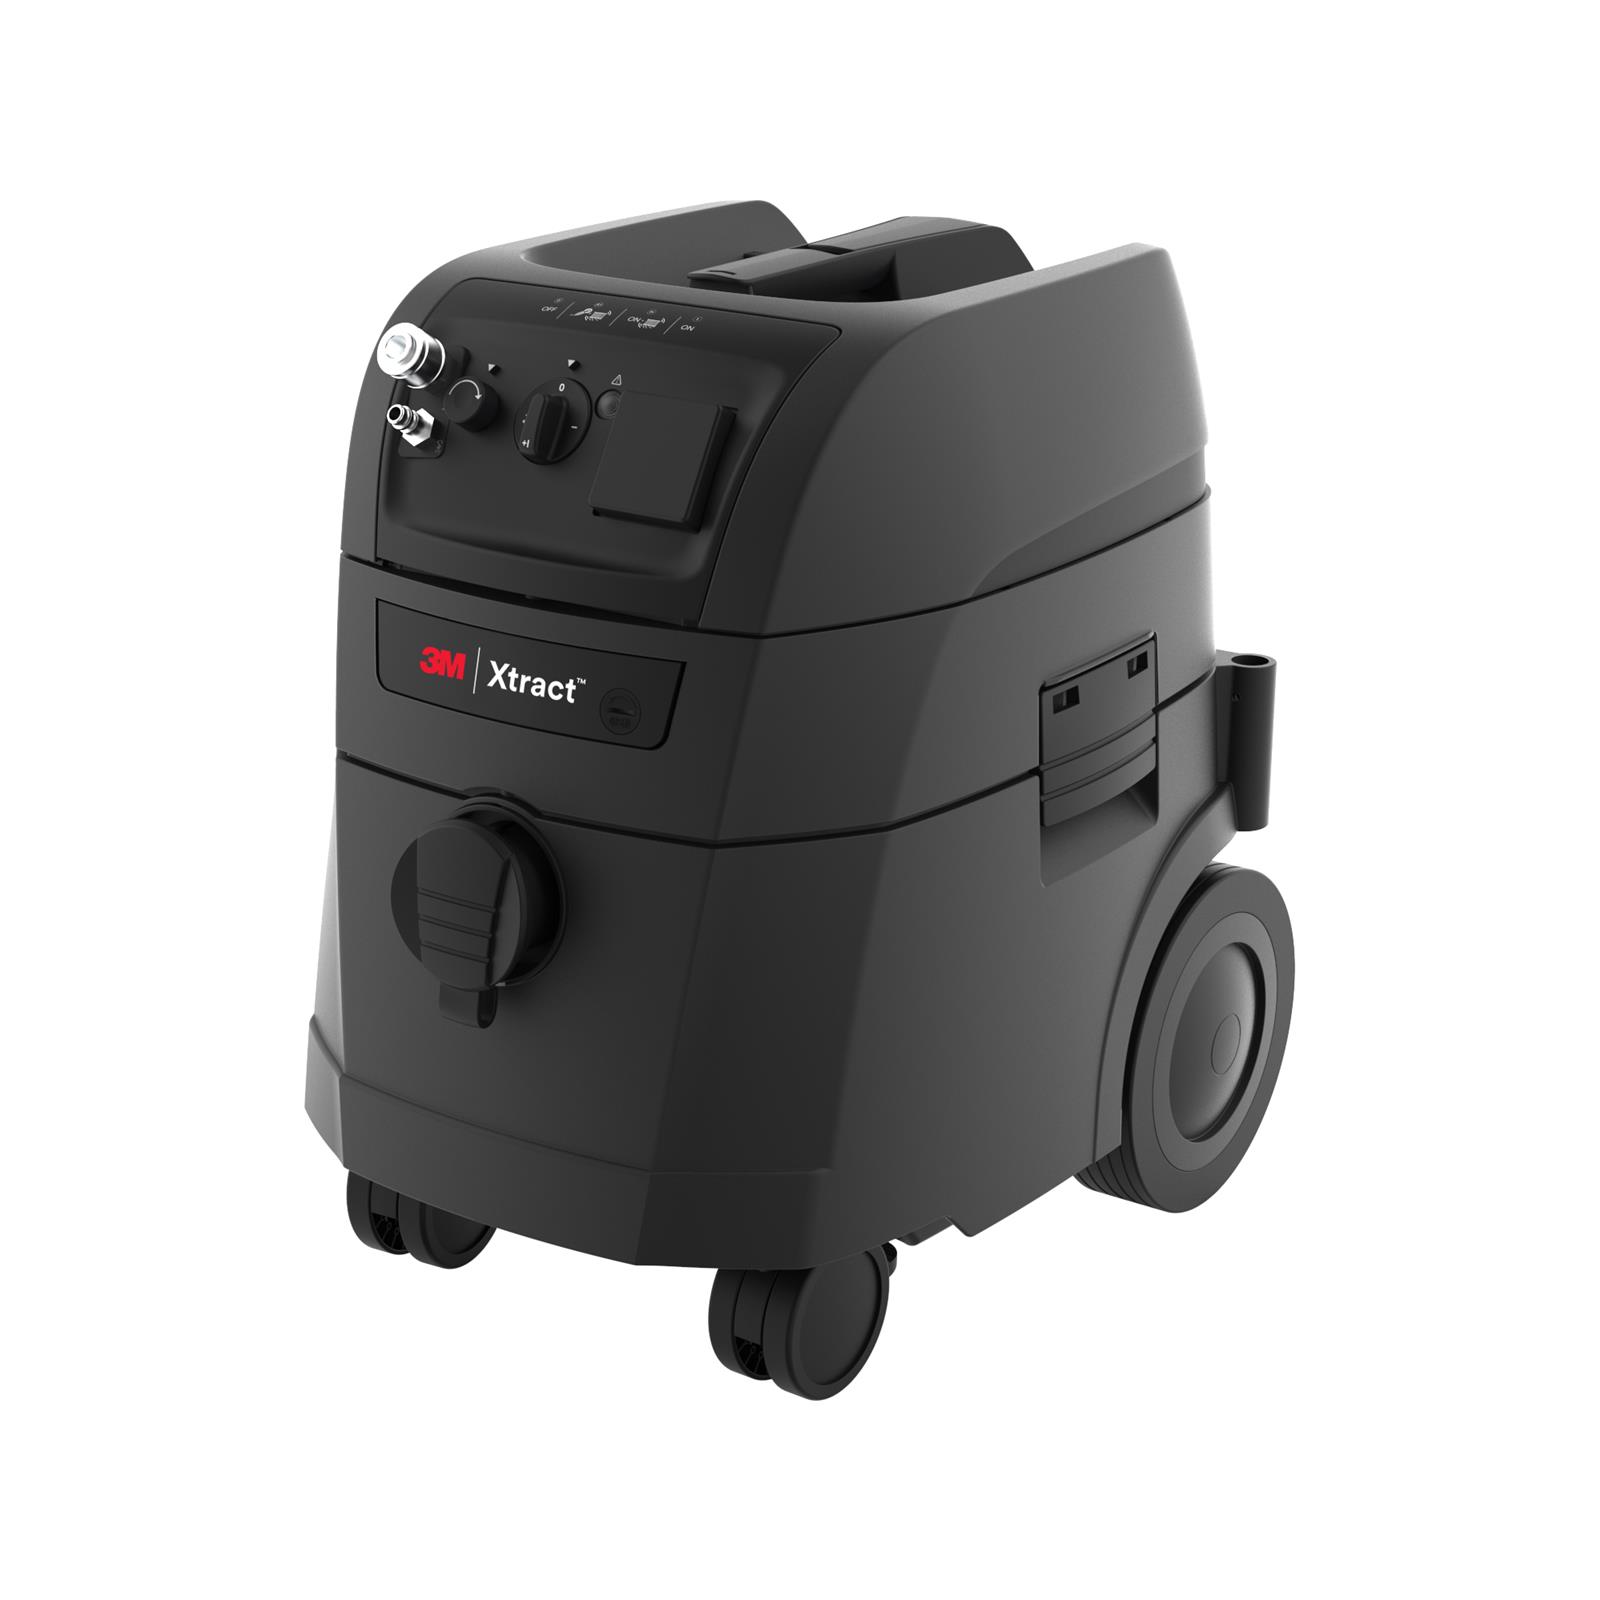 3m xtract portable dust extractor